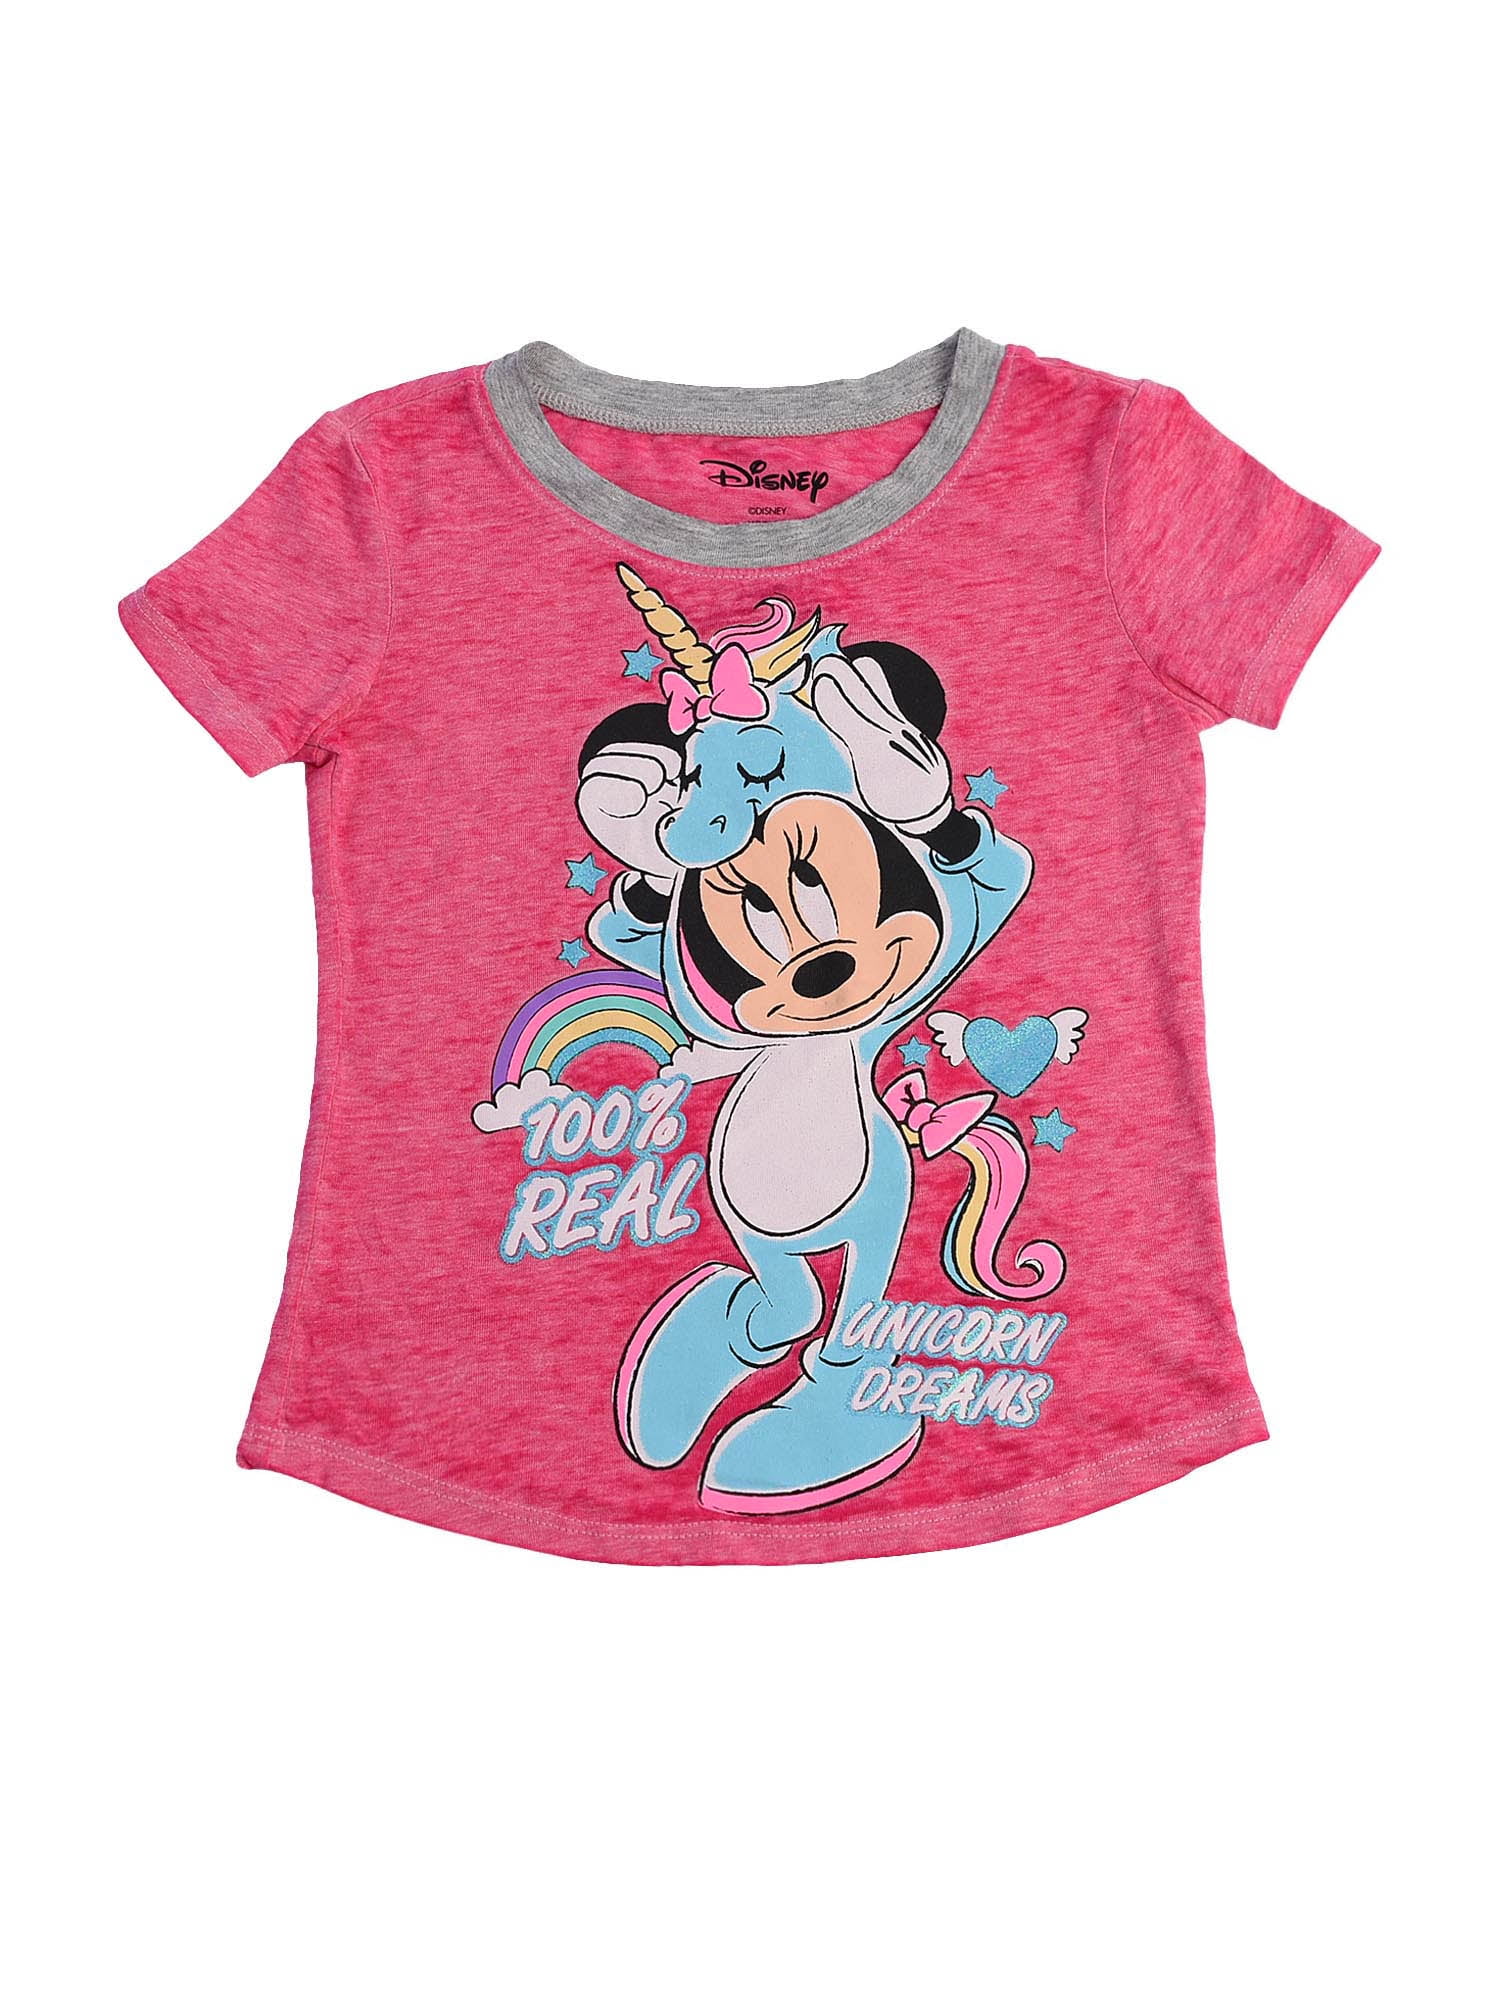 Youth Girls Pink and Grey Minnie Mouse Unicorn T-Shirt